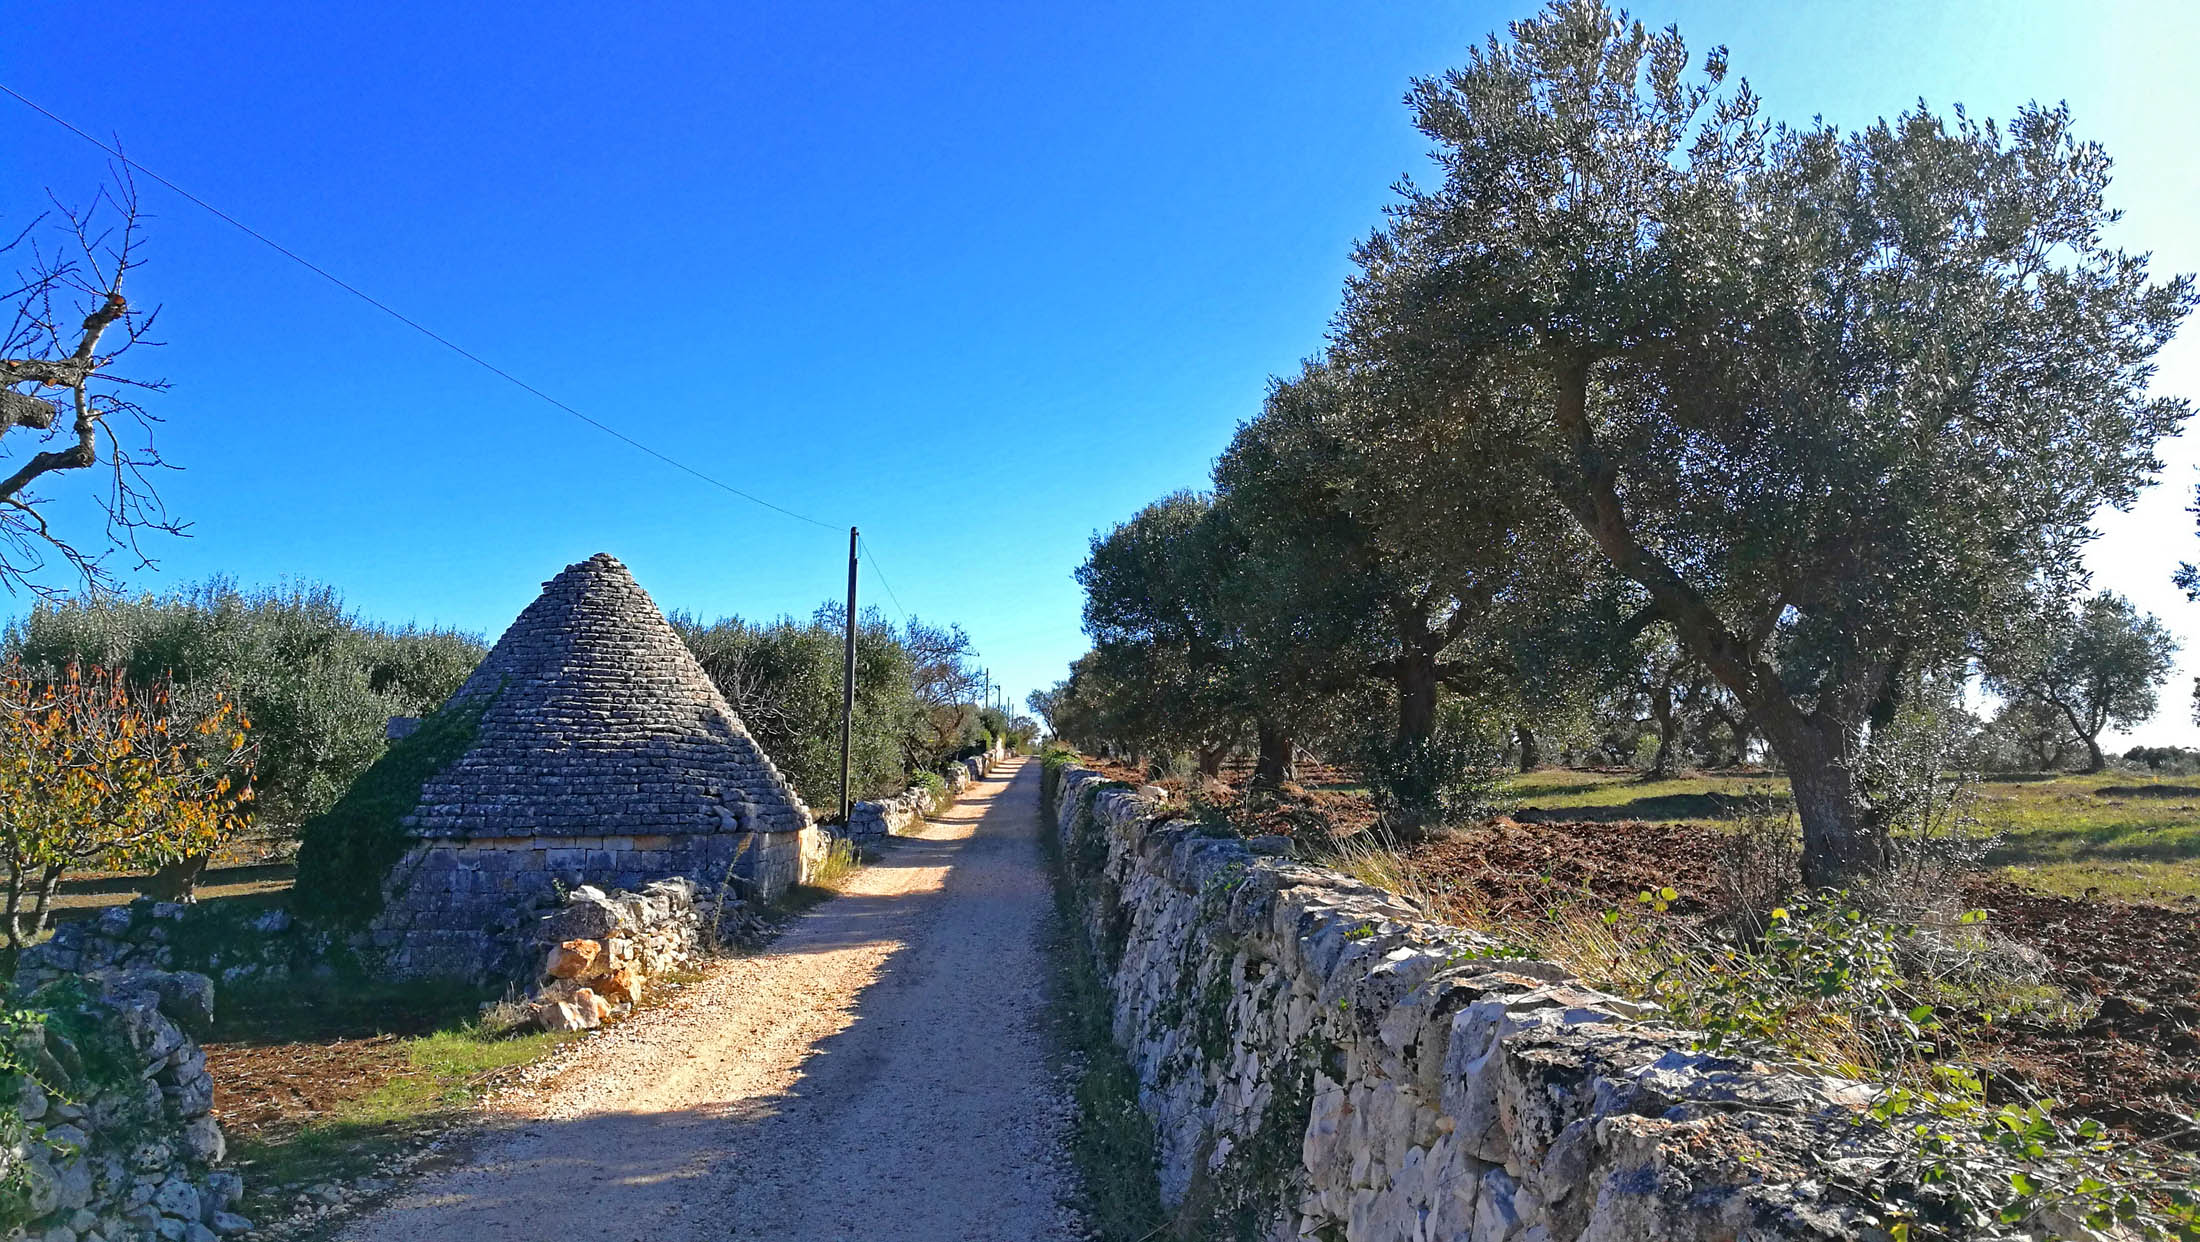 EXPERIENCE CENTRAL APULIA BY BICYCLE